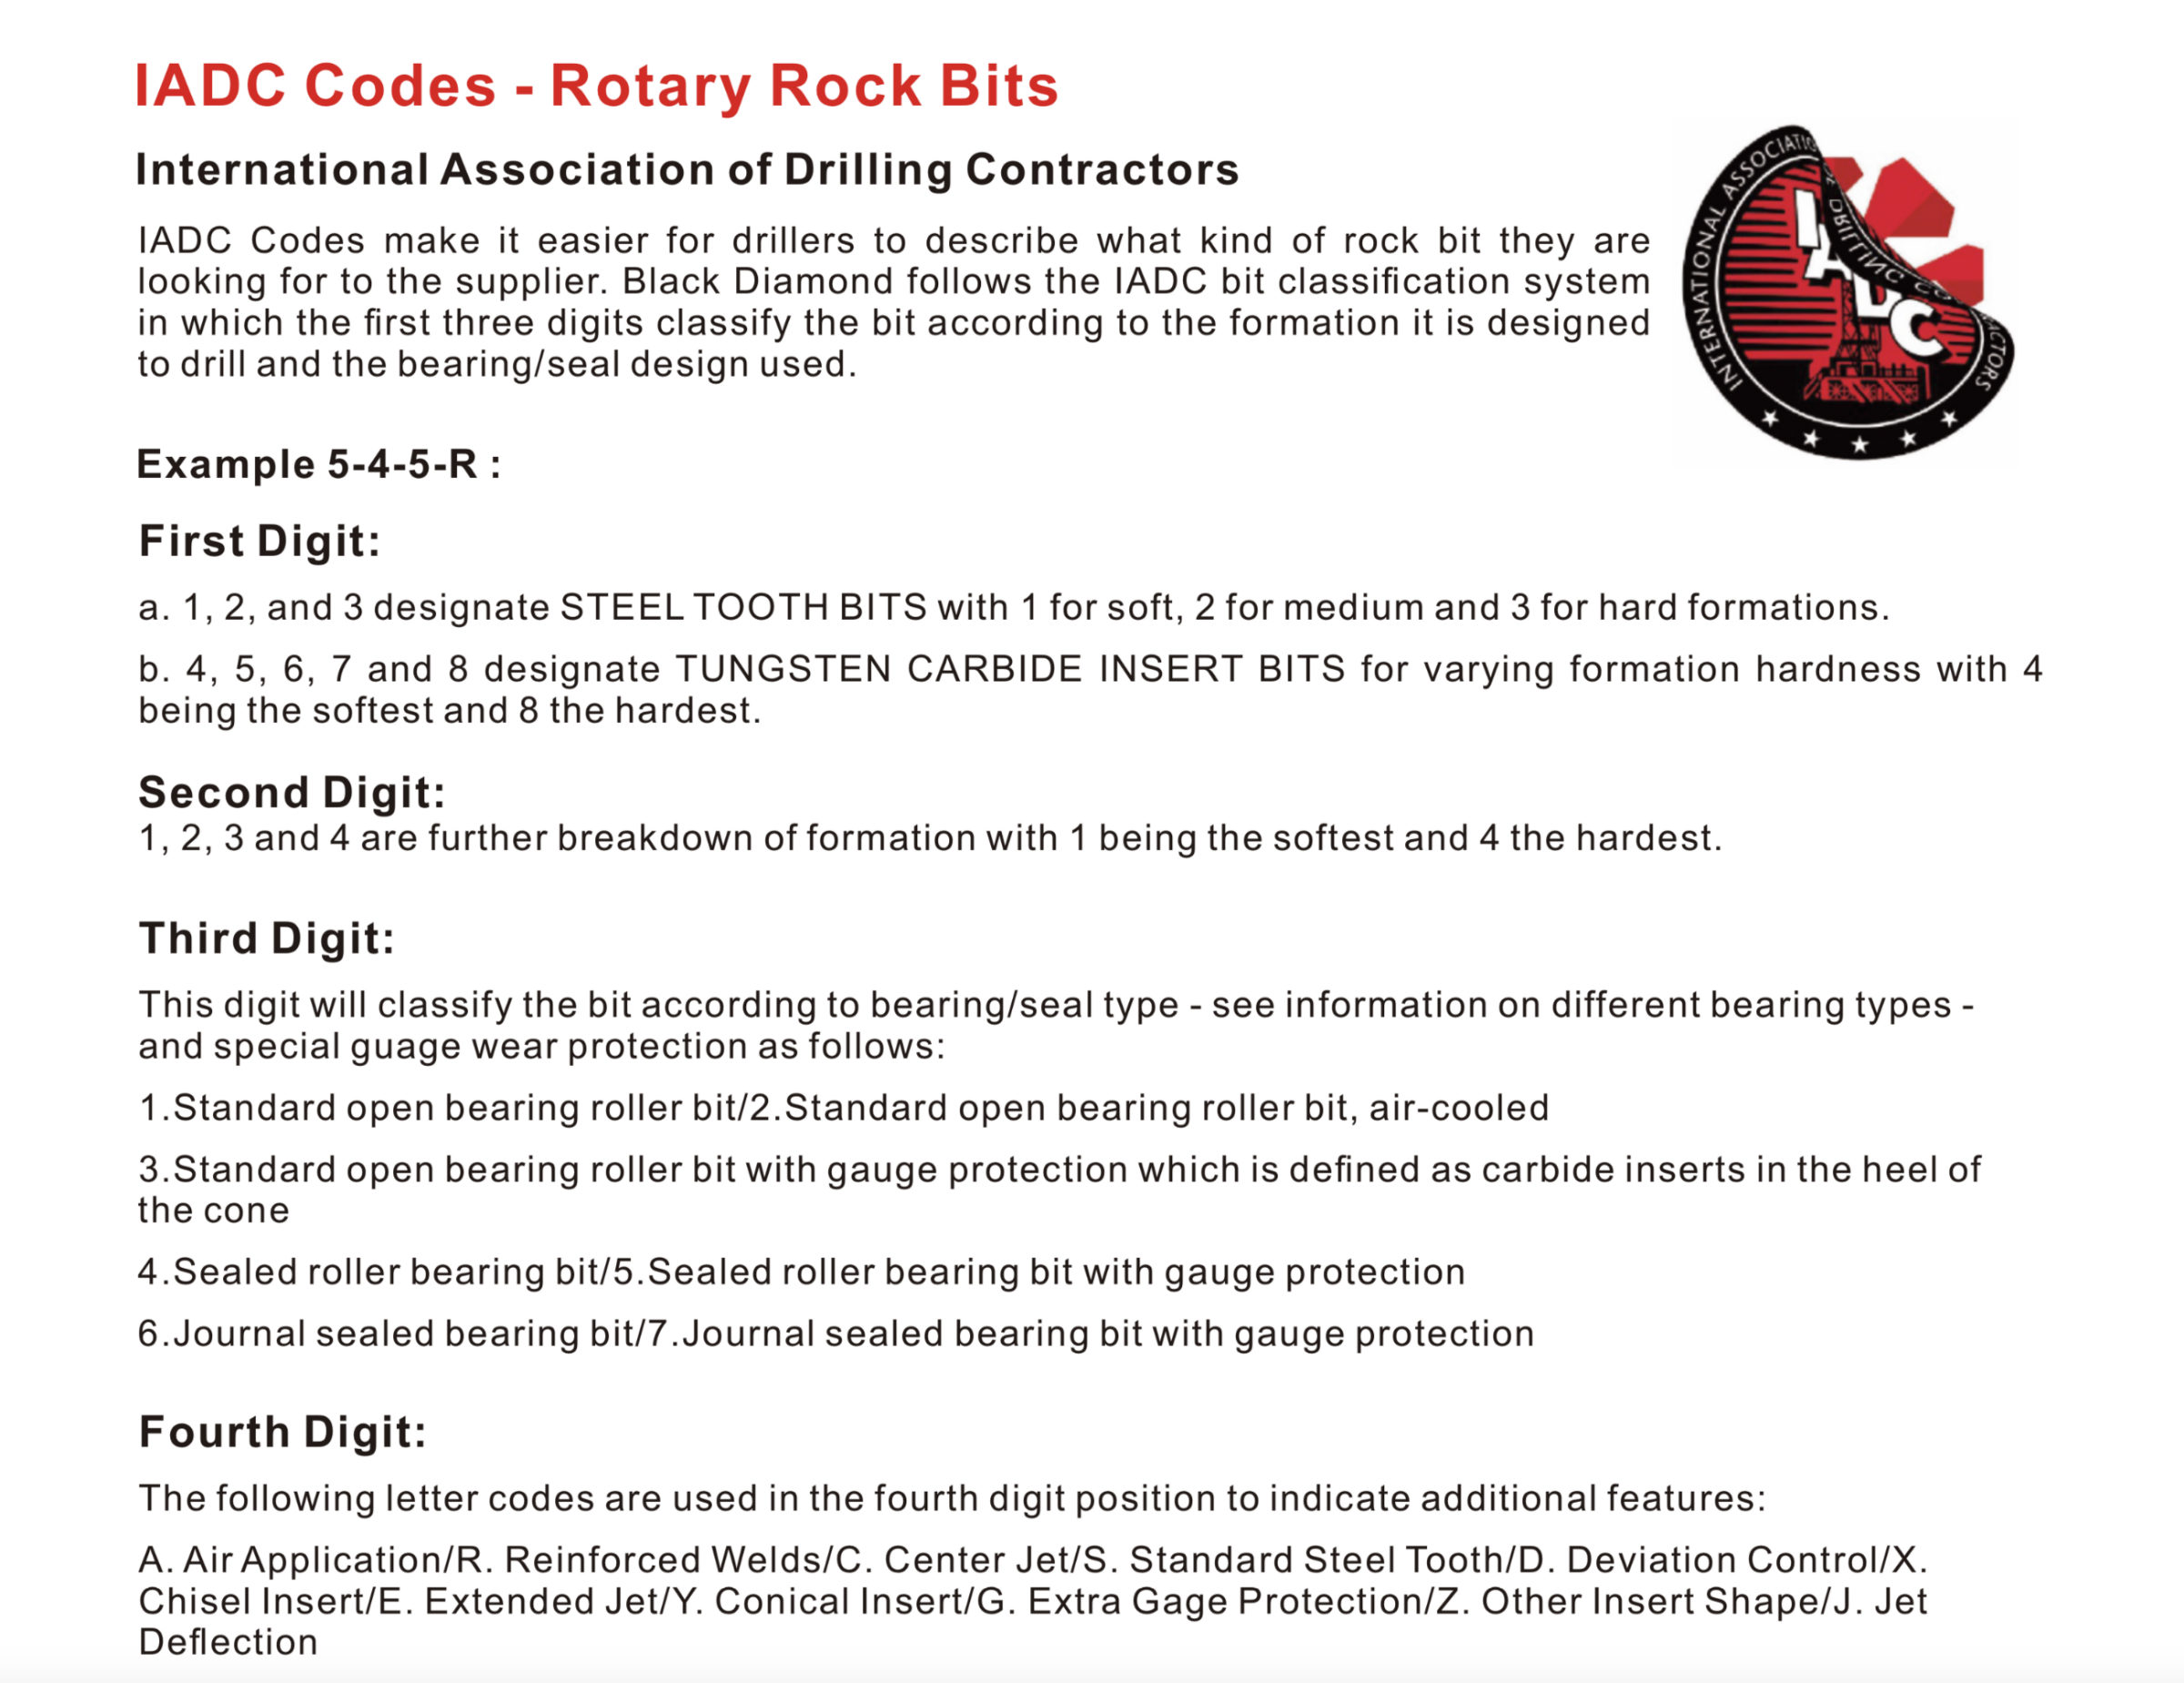 IADC Codes Rotary Rock Bits Digit Guide